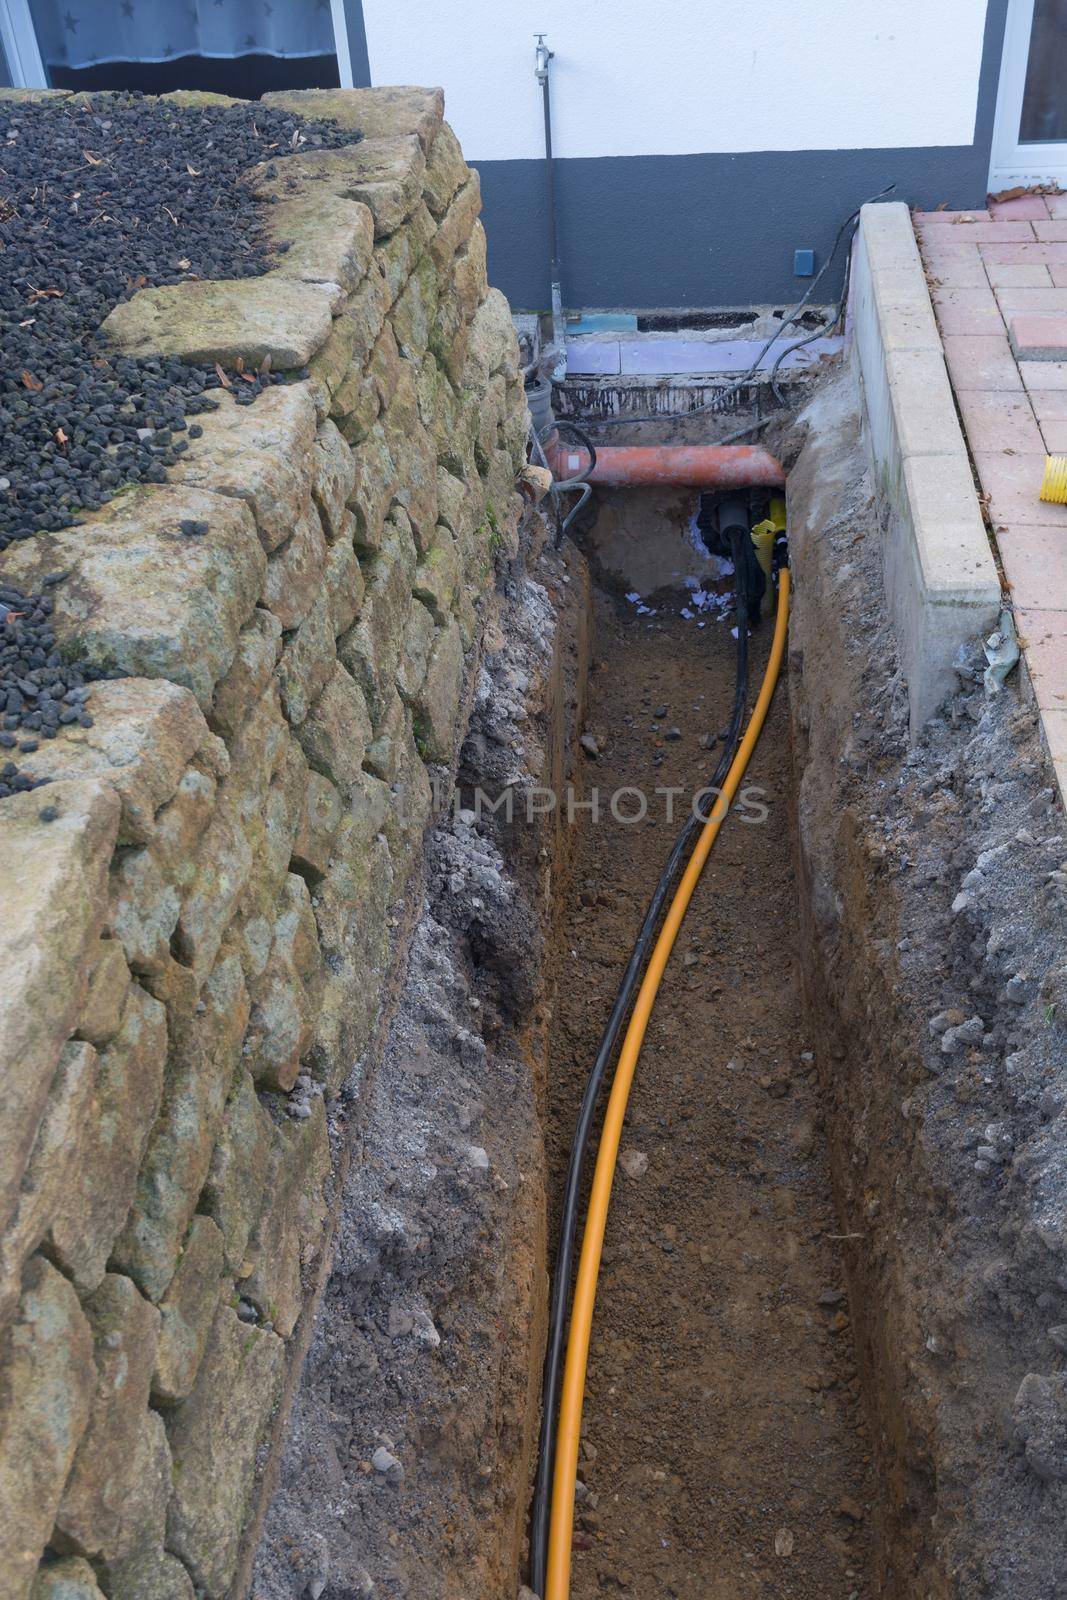 Supply lines in the ditch for the energy supply of a multiple dwelling